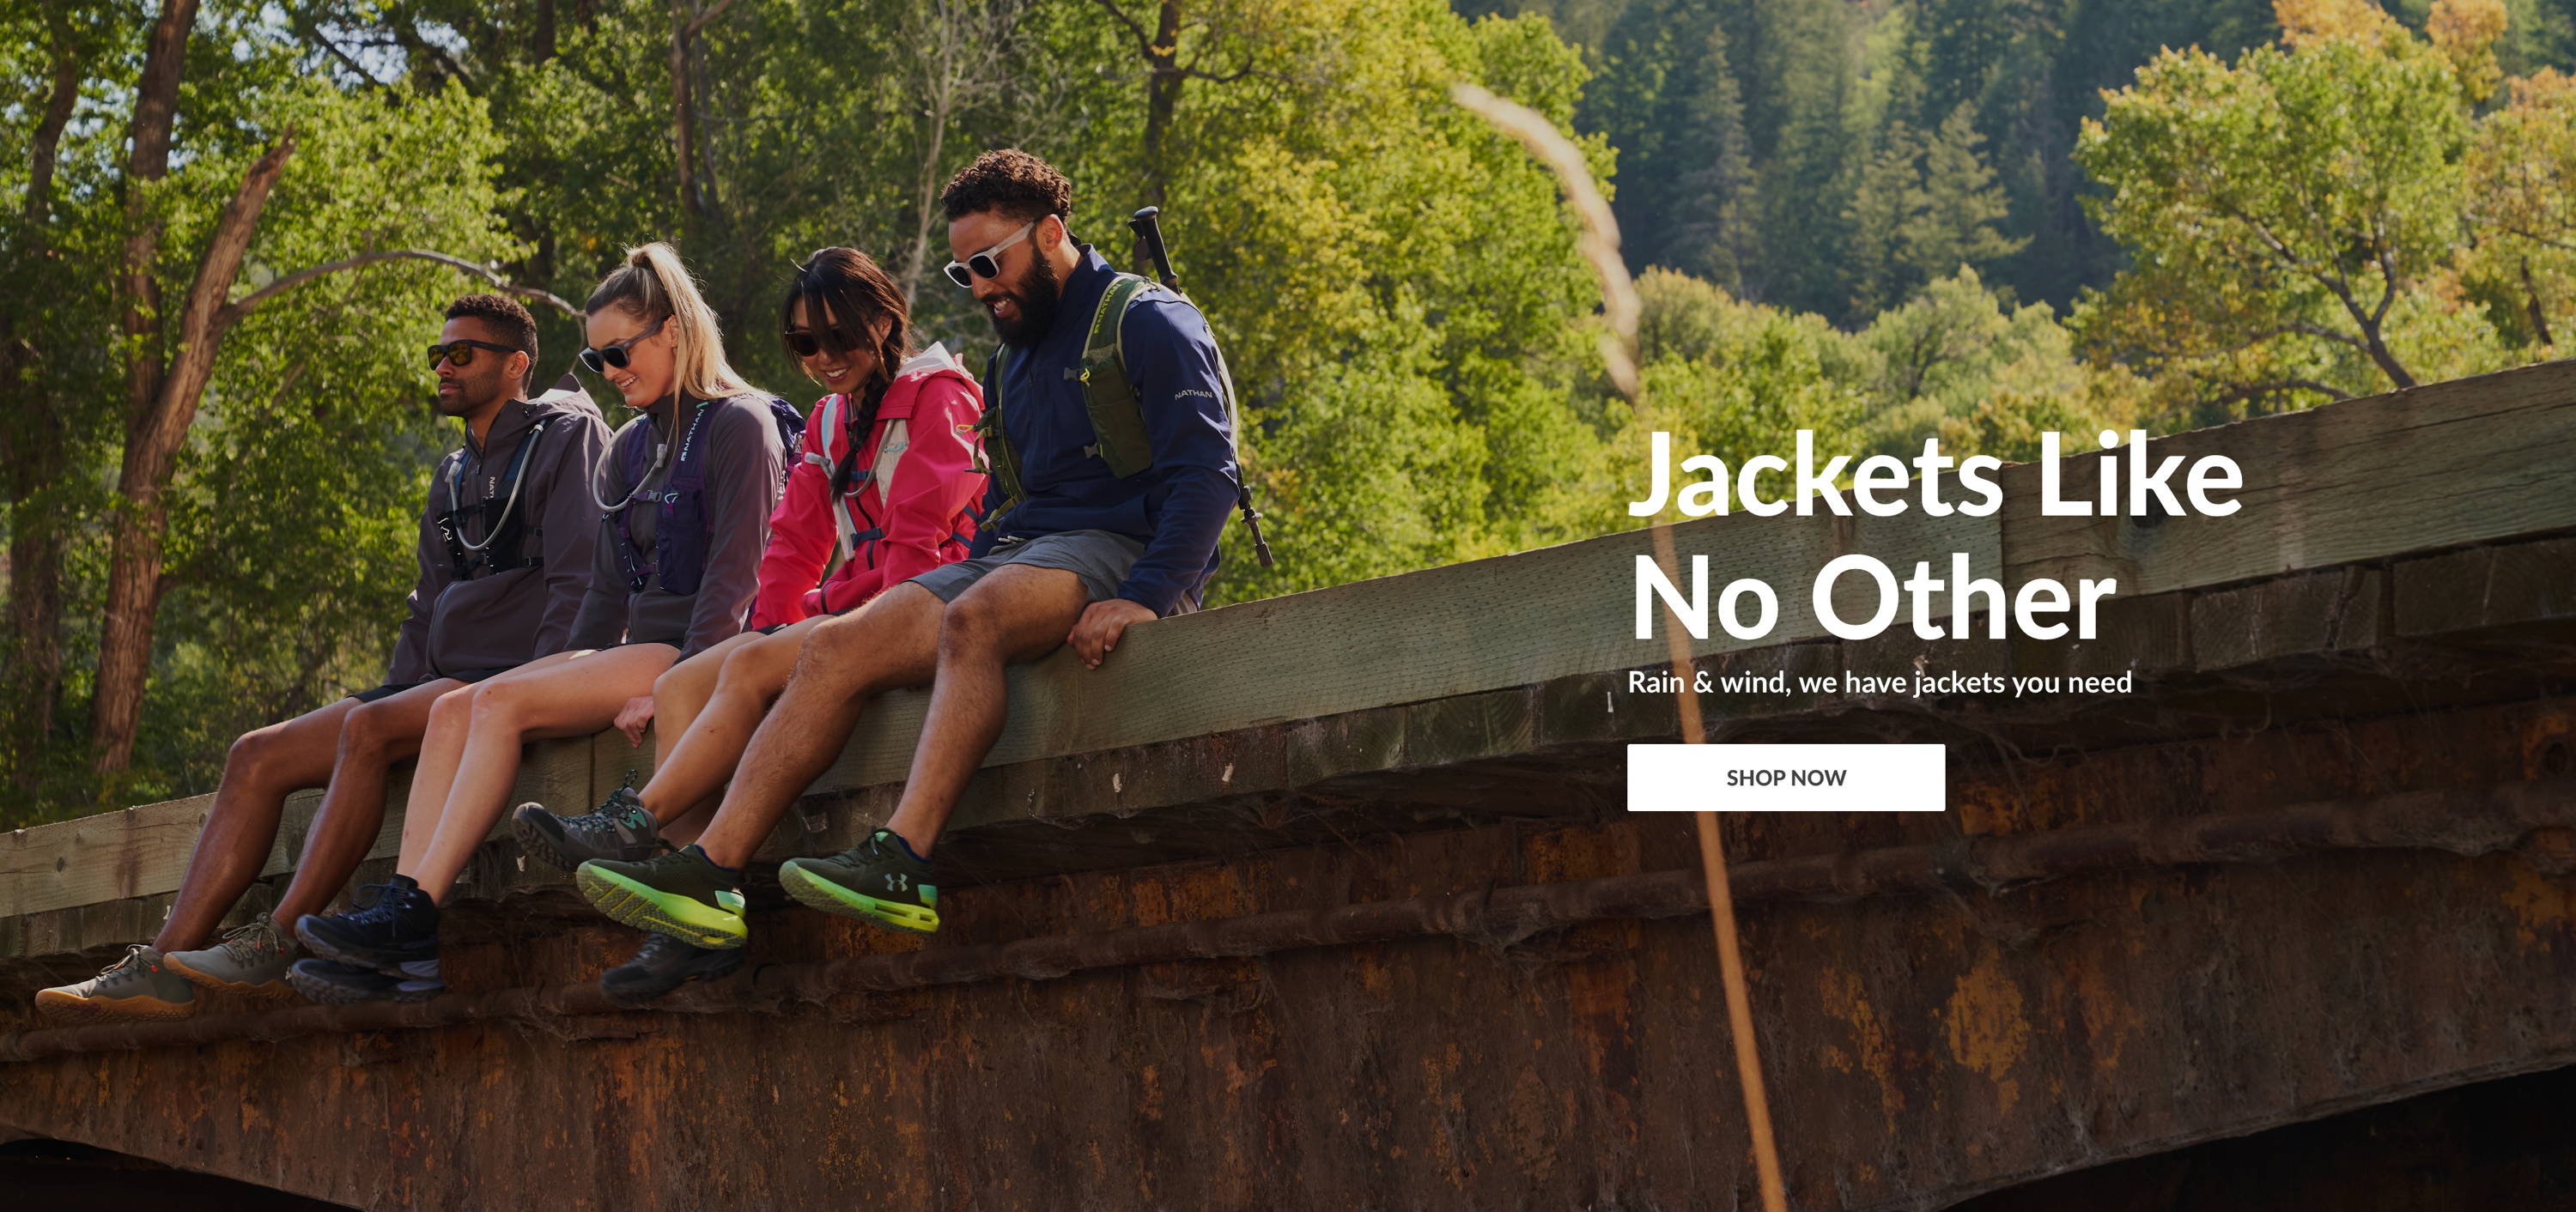 Jackets Like No Other. Rain & wind, we have jackets you need. SHOP NOW